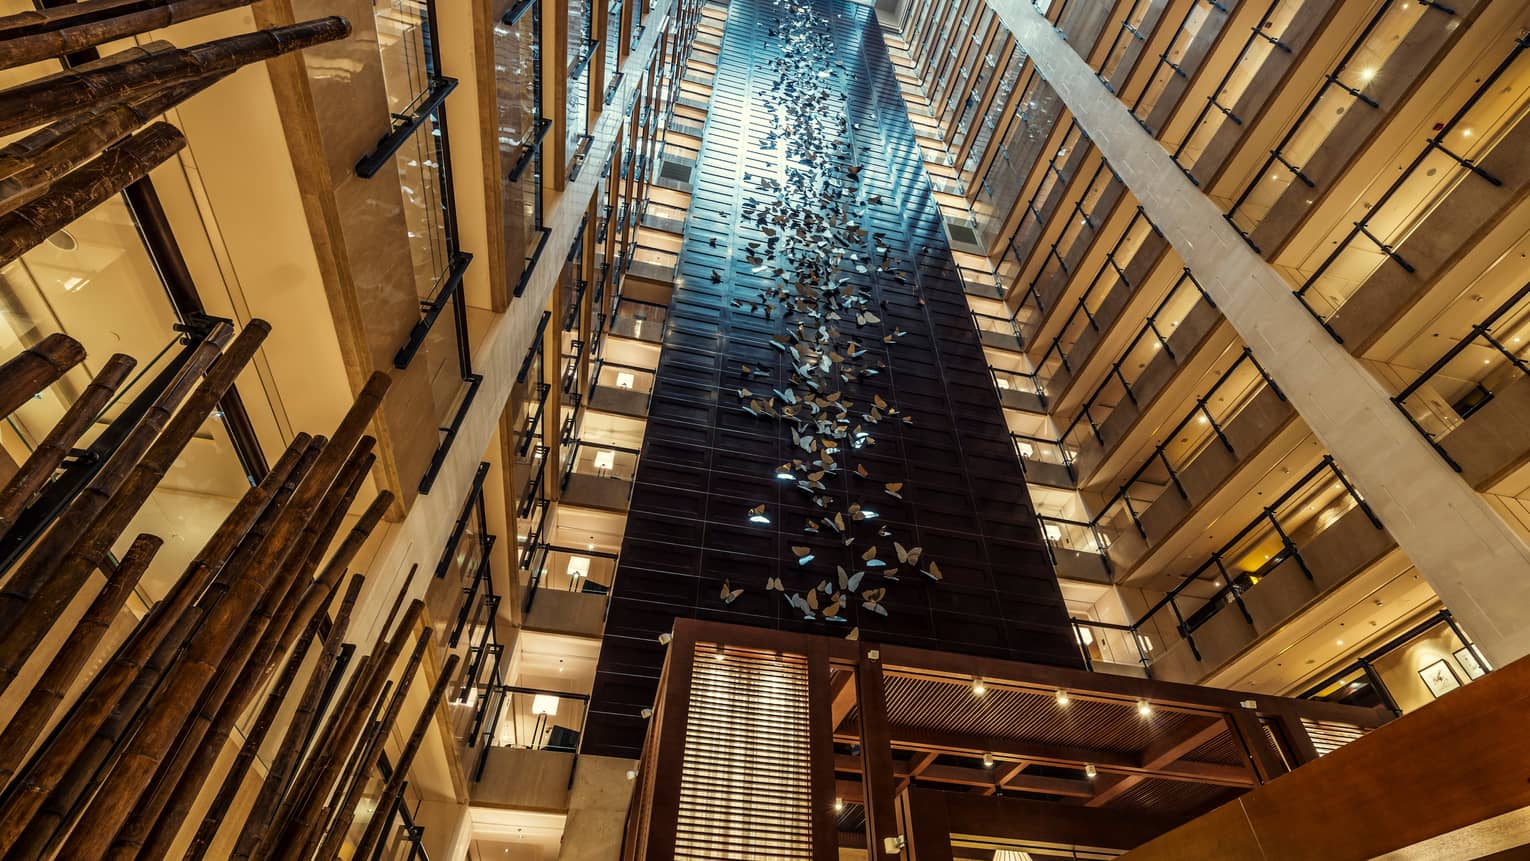 Looking up in 20-storey hotel atrium at 400 stainless-steel butterflies on column